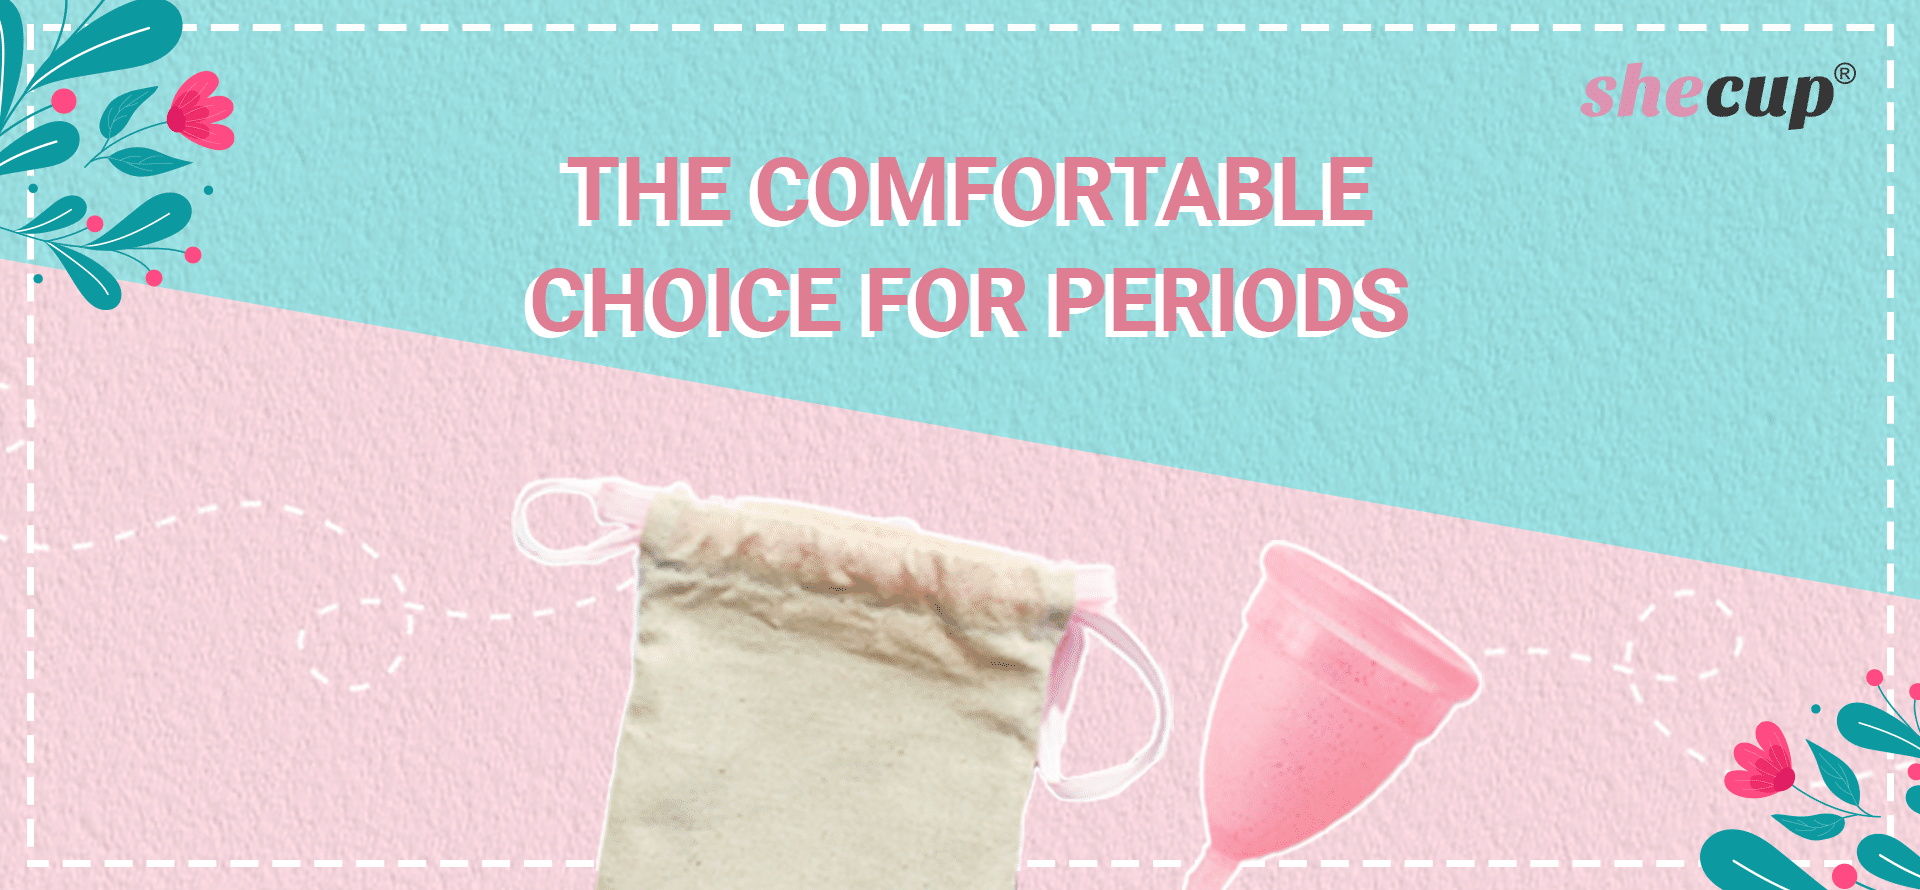 Best Menstrual Cup, About Menstrual Cup, Silicone Menstrual Cup - Shecup